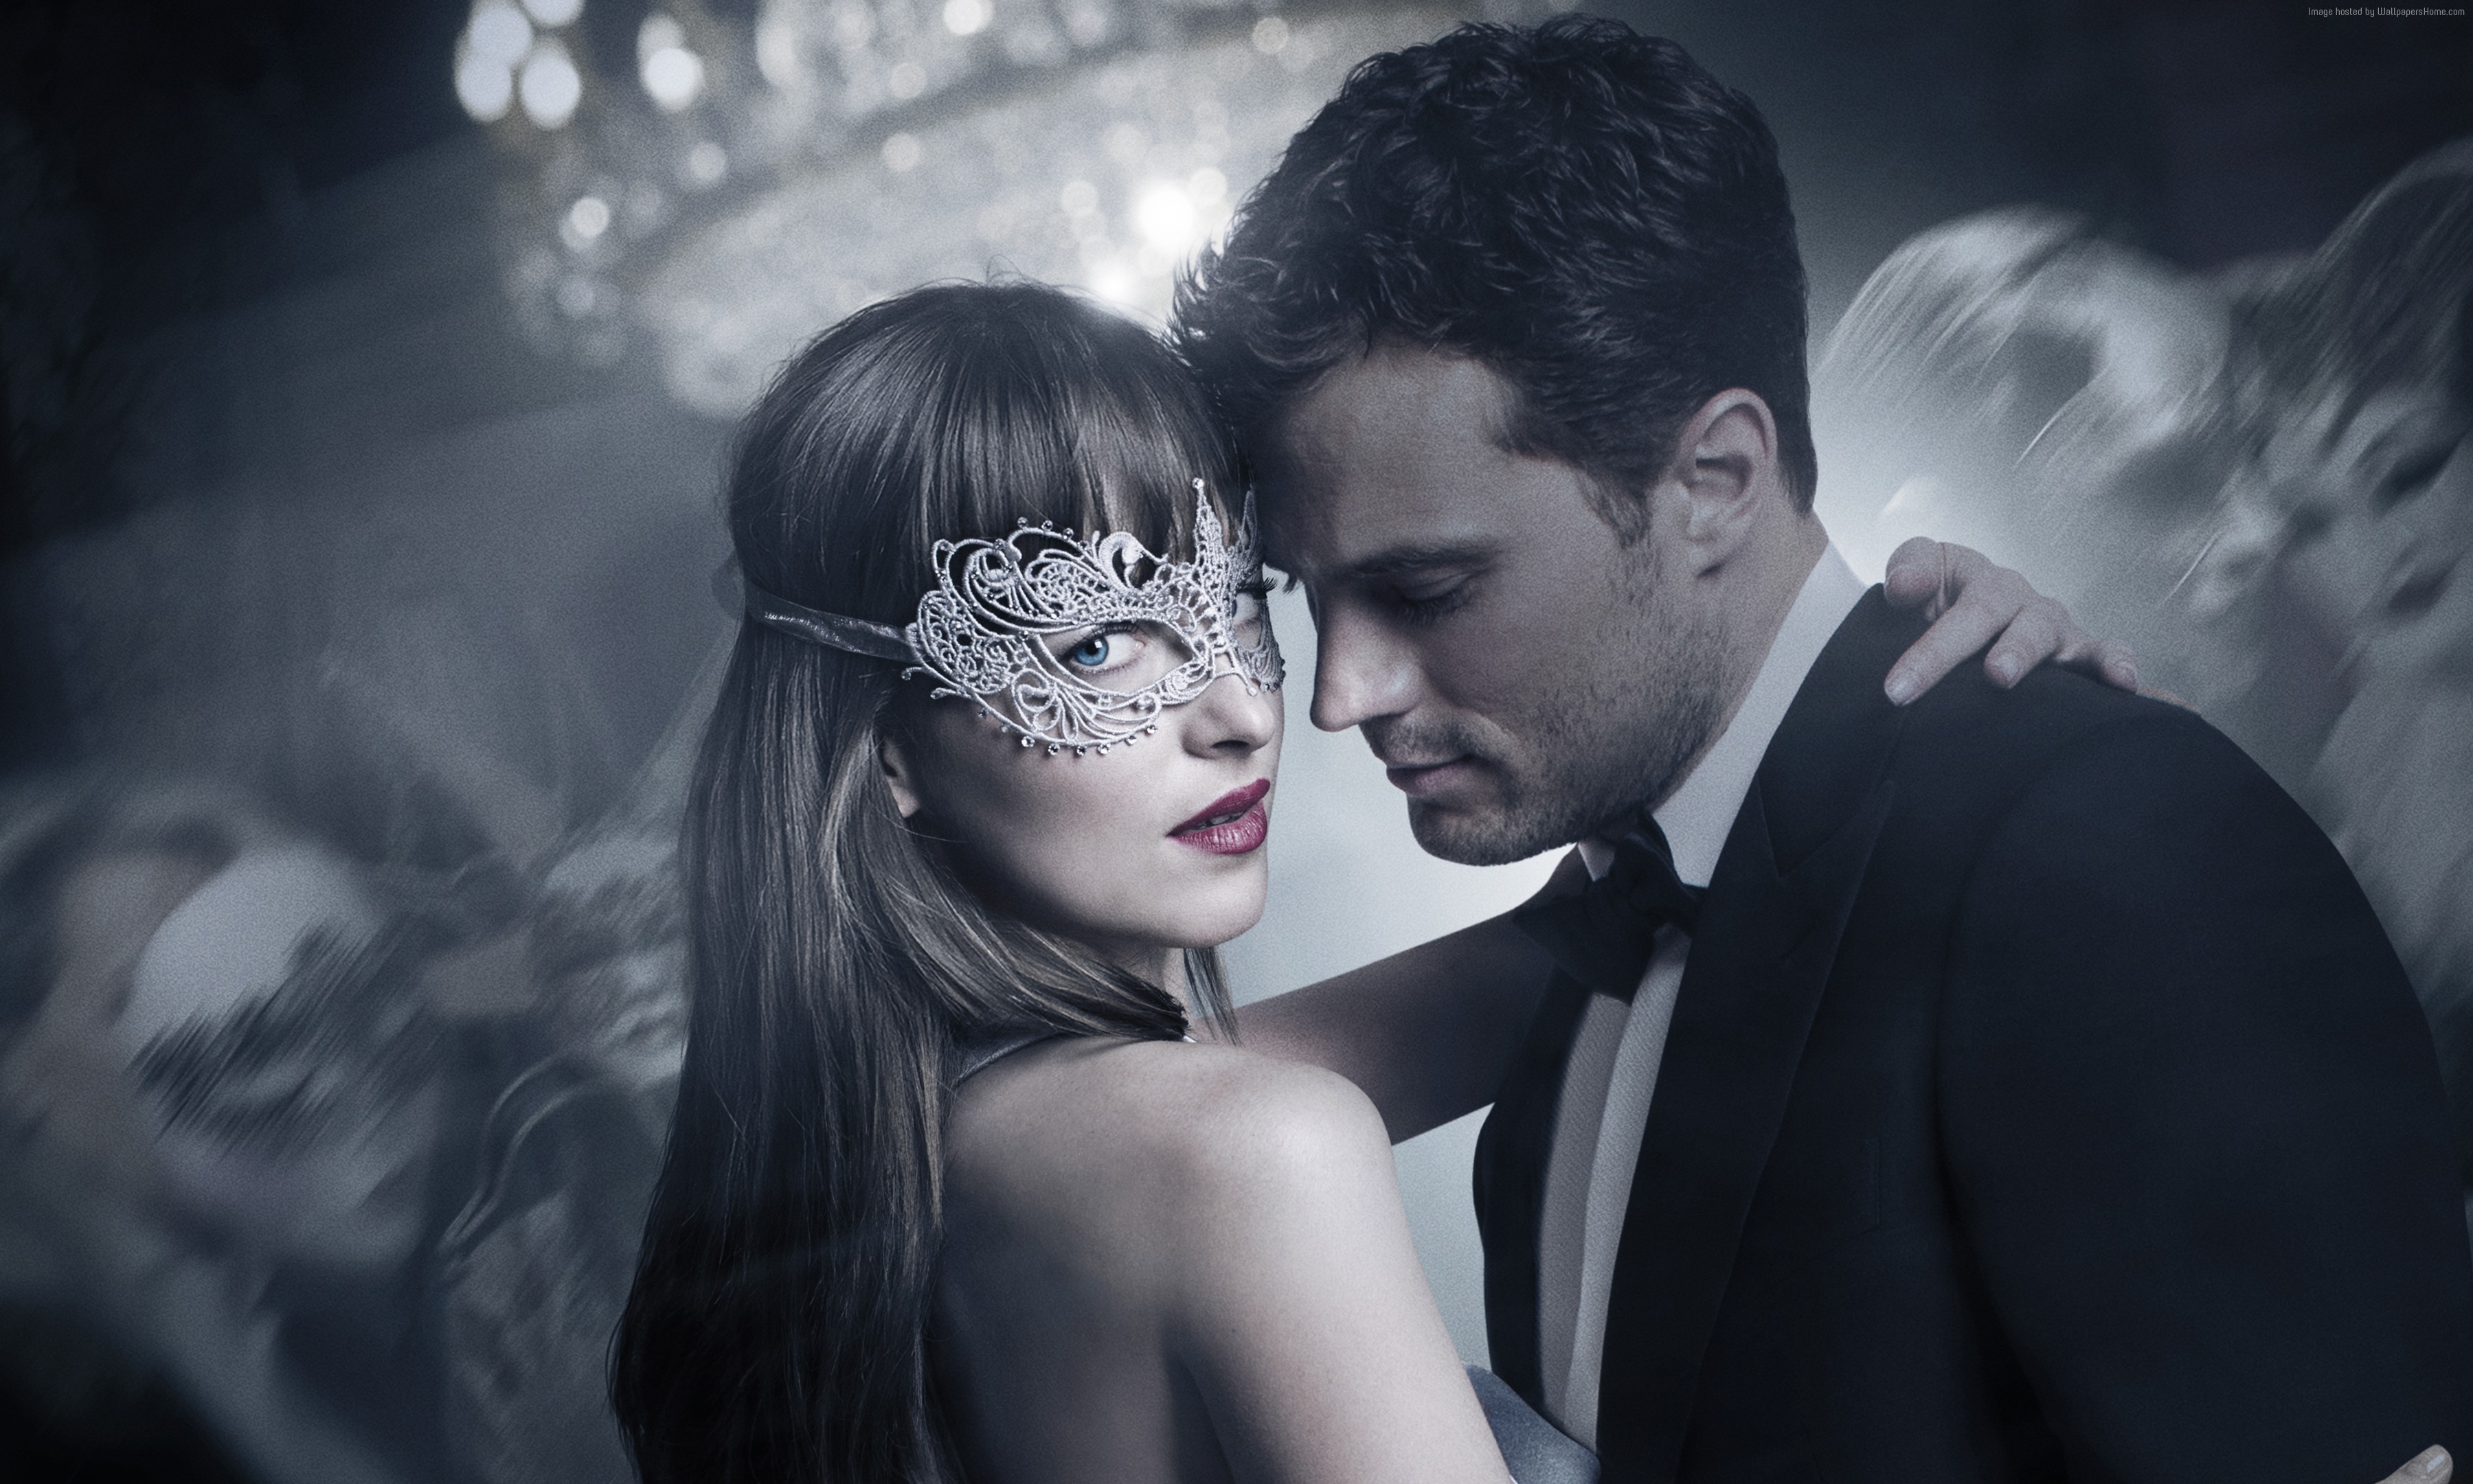 fifty shades darker free movie download for android